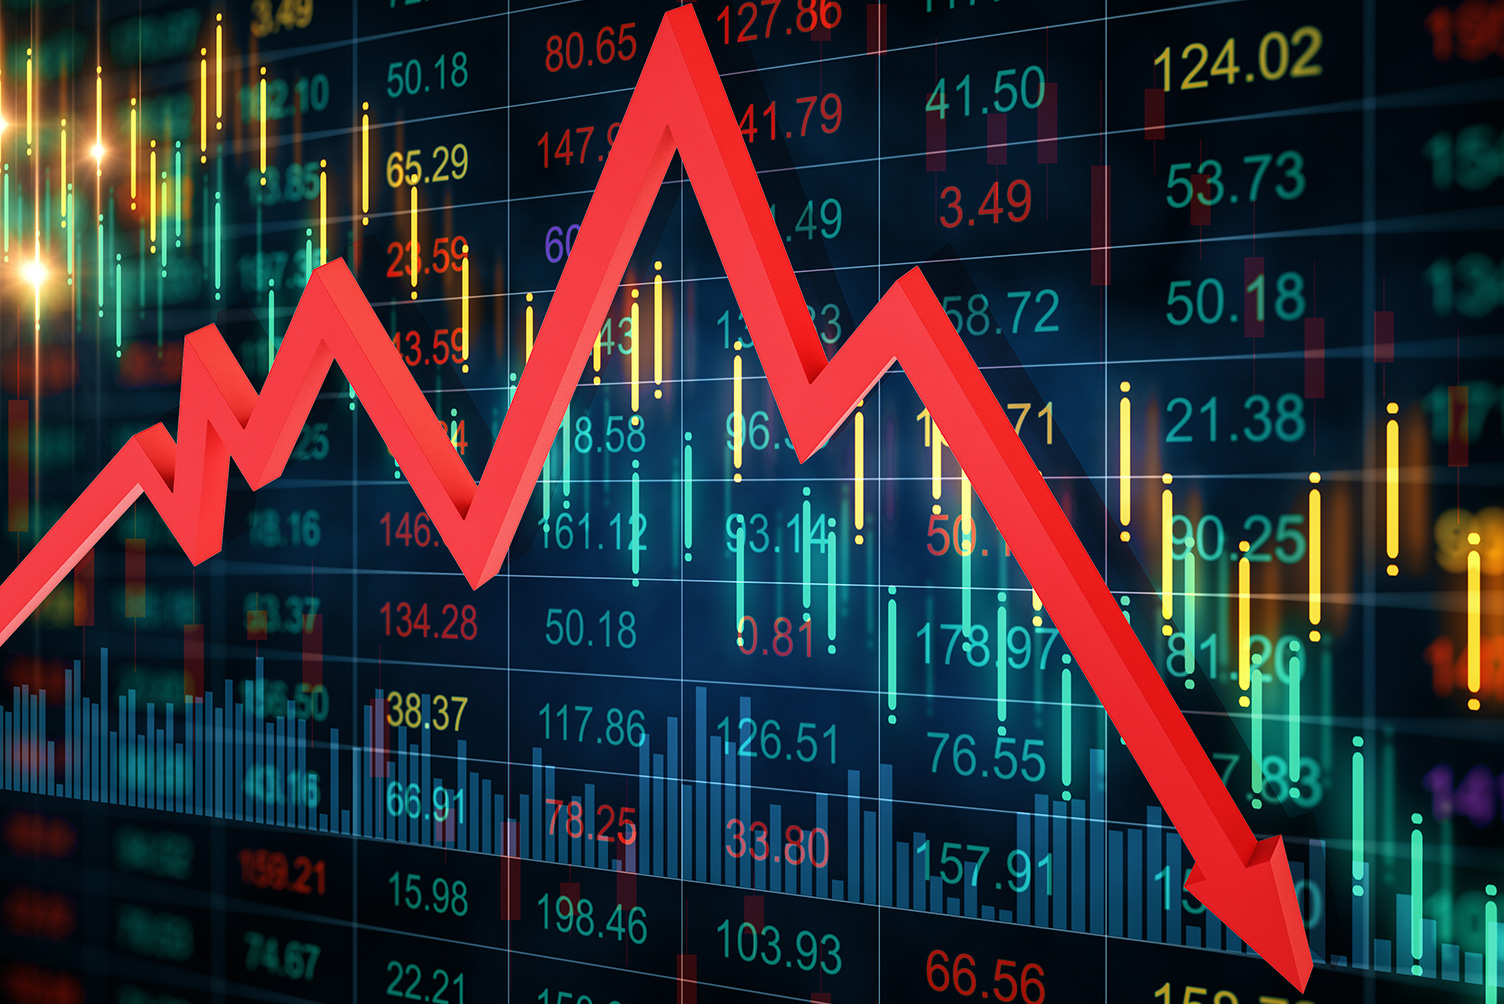 The following 3 stocks fared the worst amid today's decline